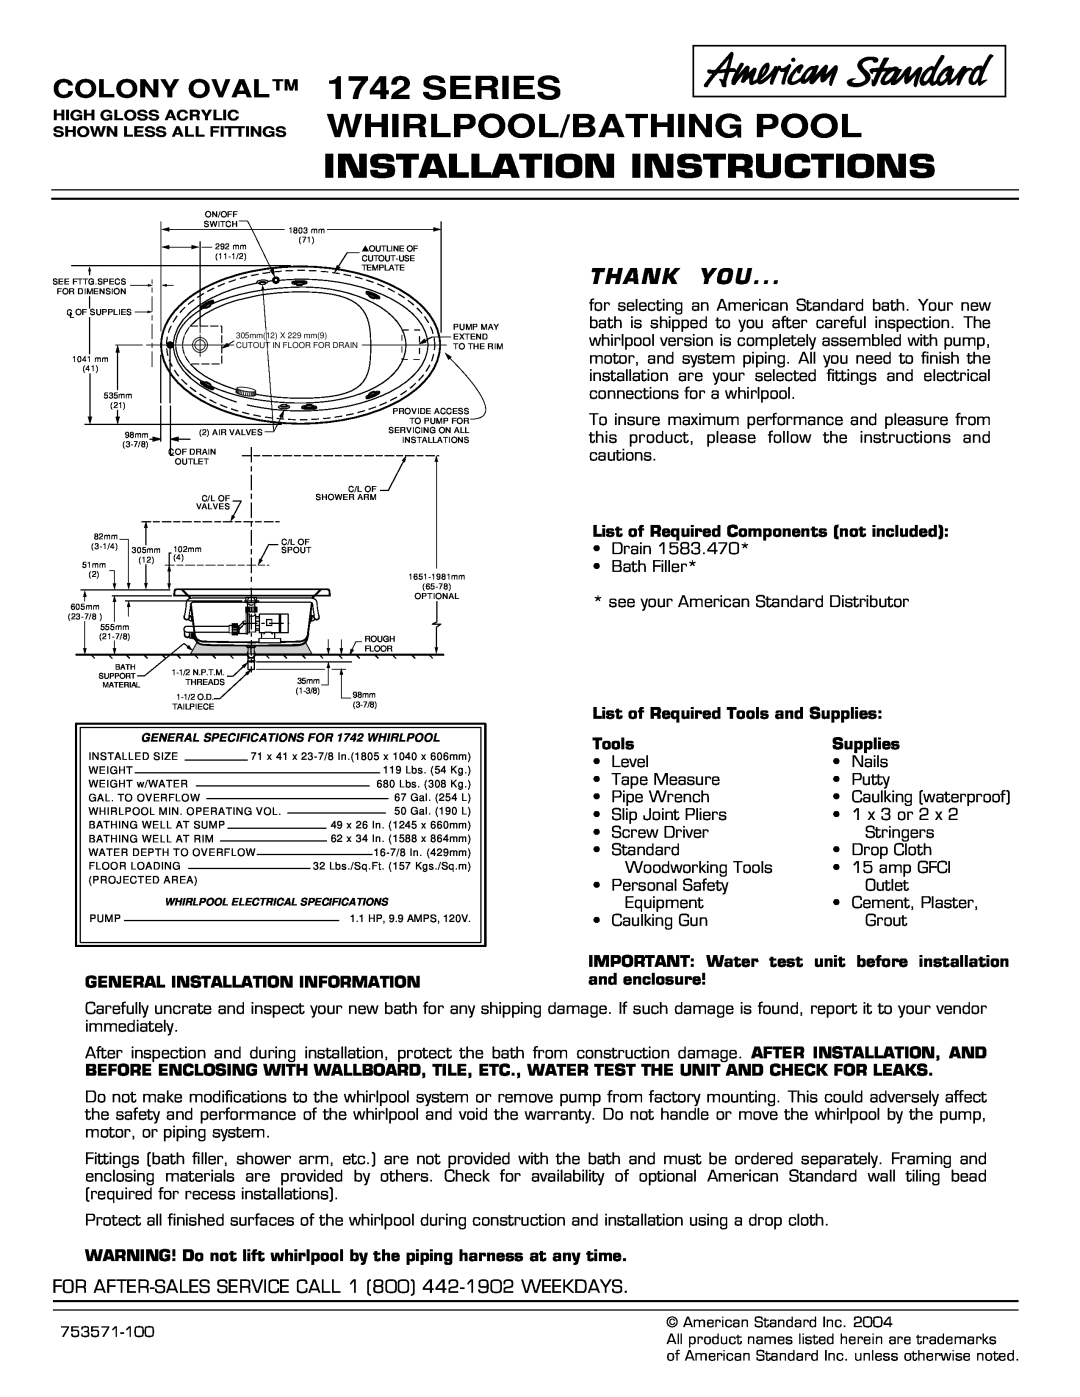 American Standard 1742 Series installation instructions Series Whirlpool/Bathing Pool, Installation Instructions, Tools 